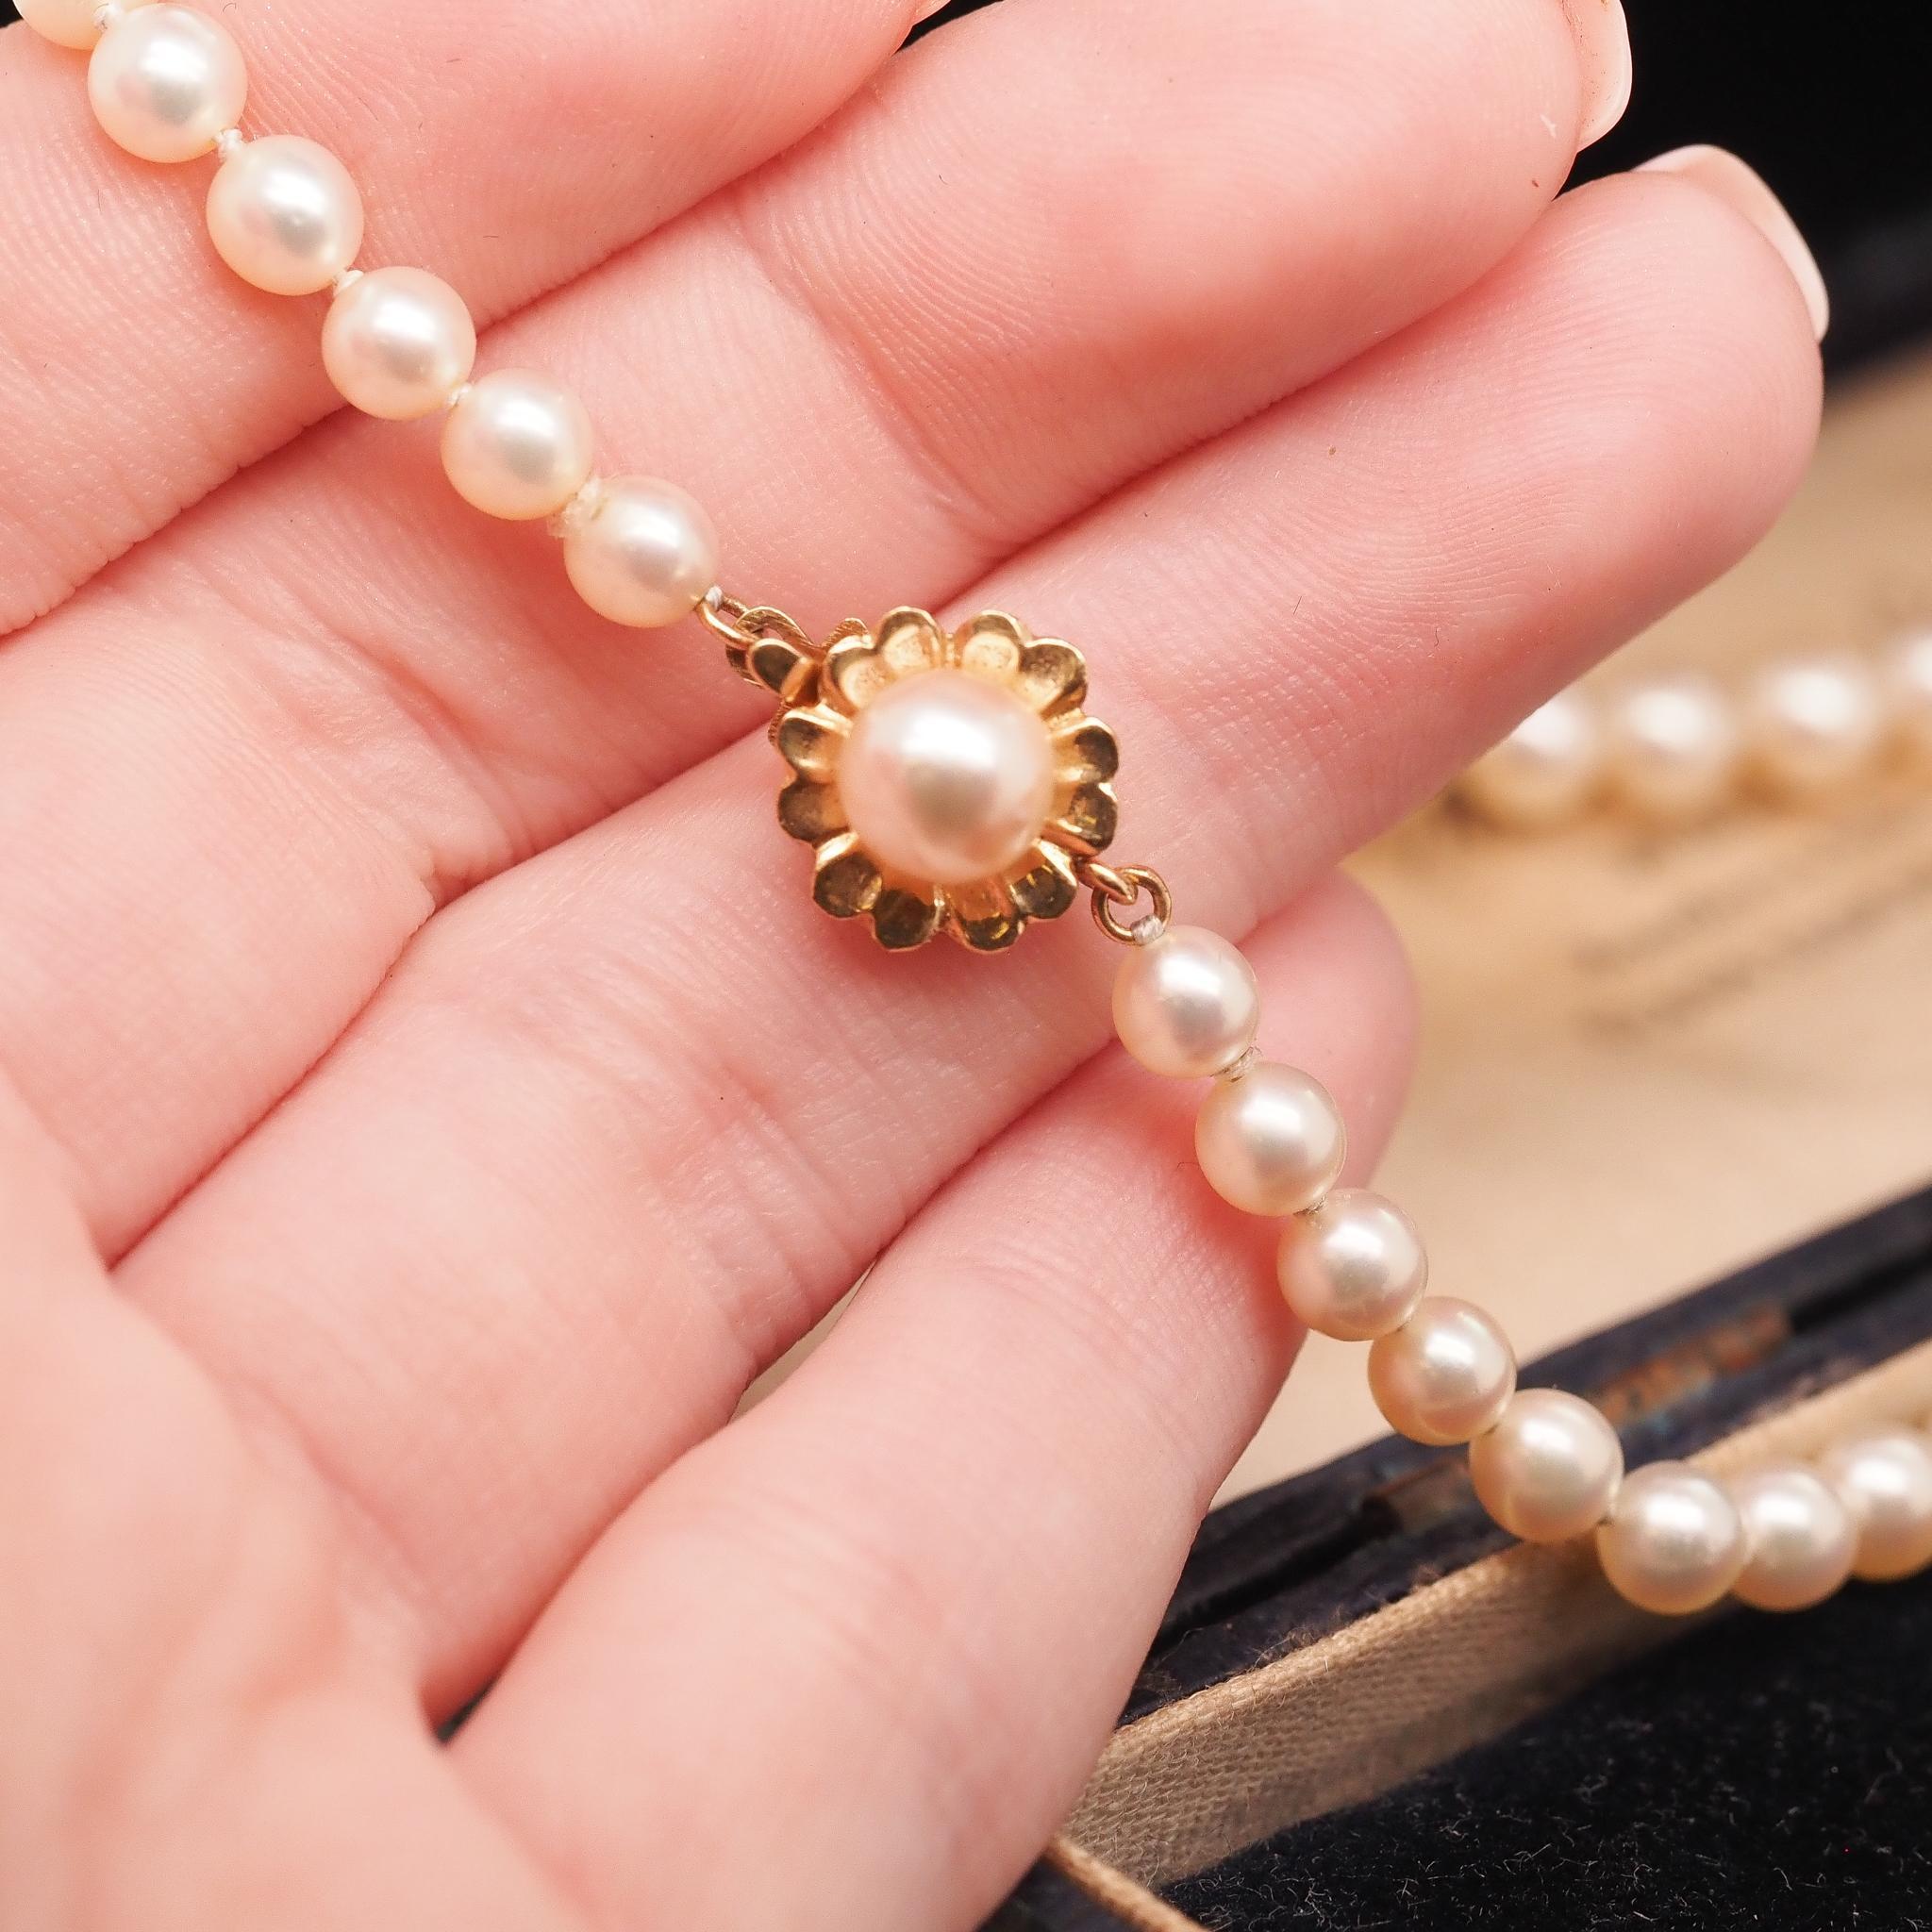 Year: 1960s
Item Details:
Metal Type: [Hallmarked, and Tested]
Weight: 18.7g
Pearl: Cultured, Whiteish Pink Luster, 8mm graduating down to 4mm
Measurement: . 17 Inches
Condition: Excellent
Era: Vintage